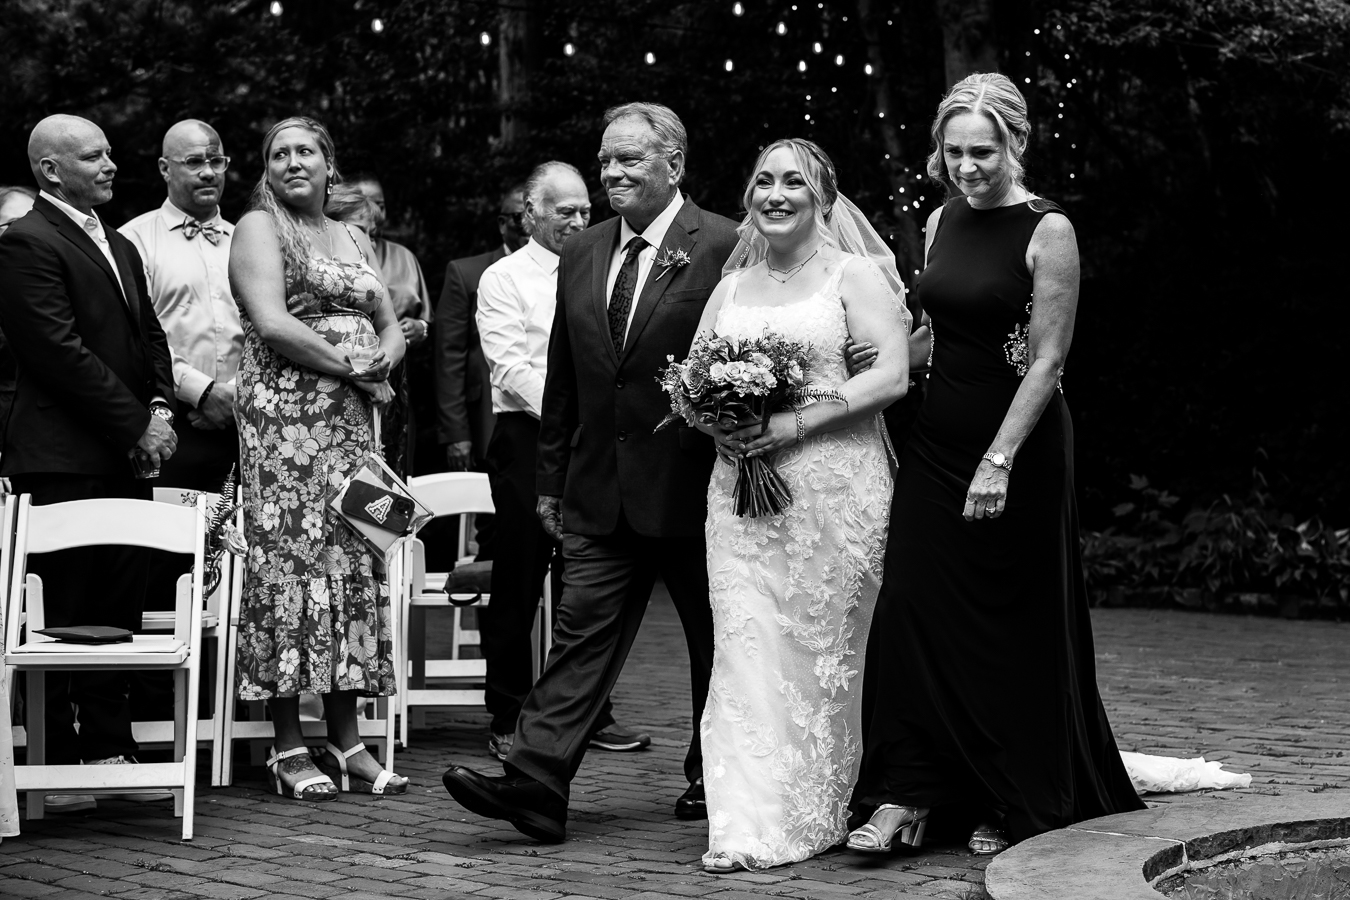 Holly Hedge Estate Wedding Photographer, lisa rhinehart, captures this image of the bride walking down the aisle with her mom and dad during their wedding ceremony 